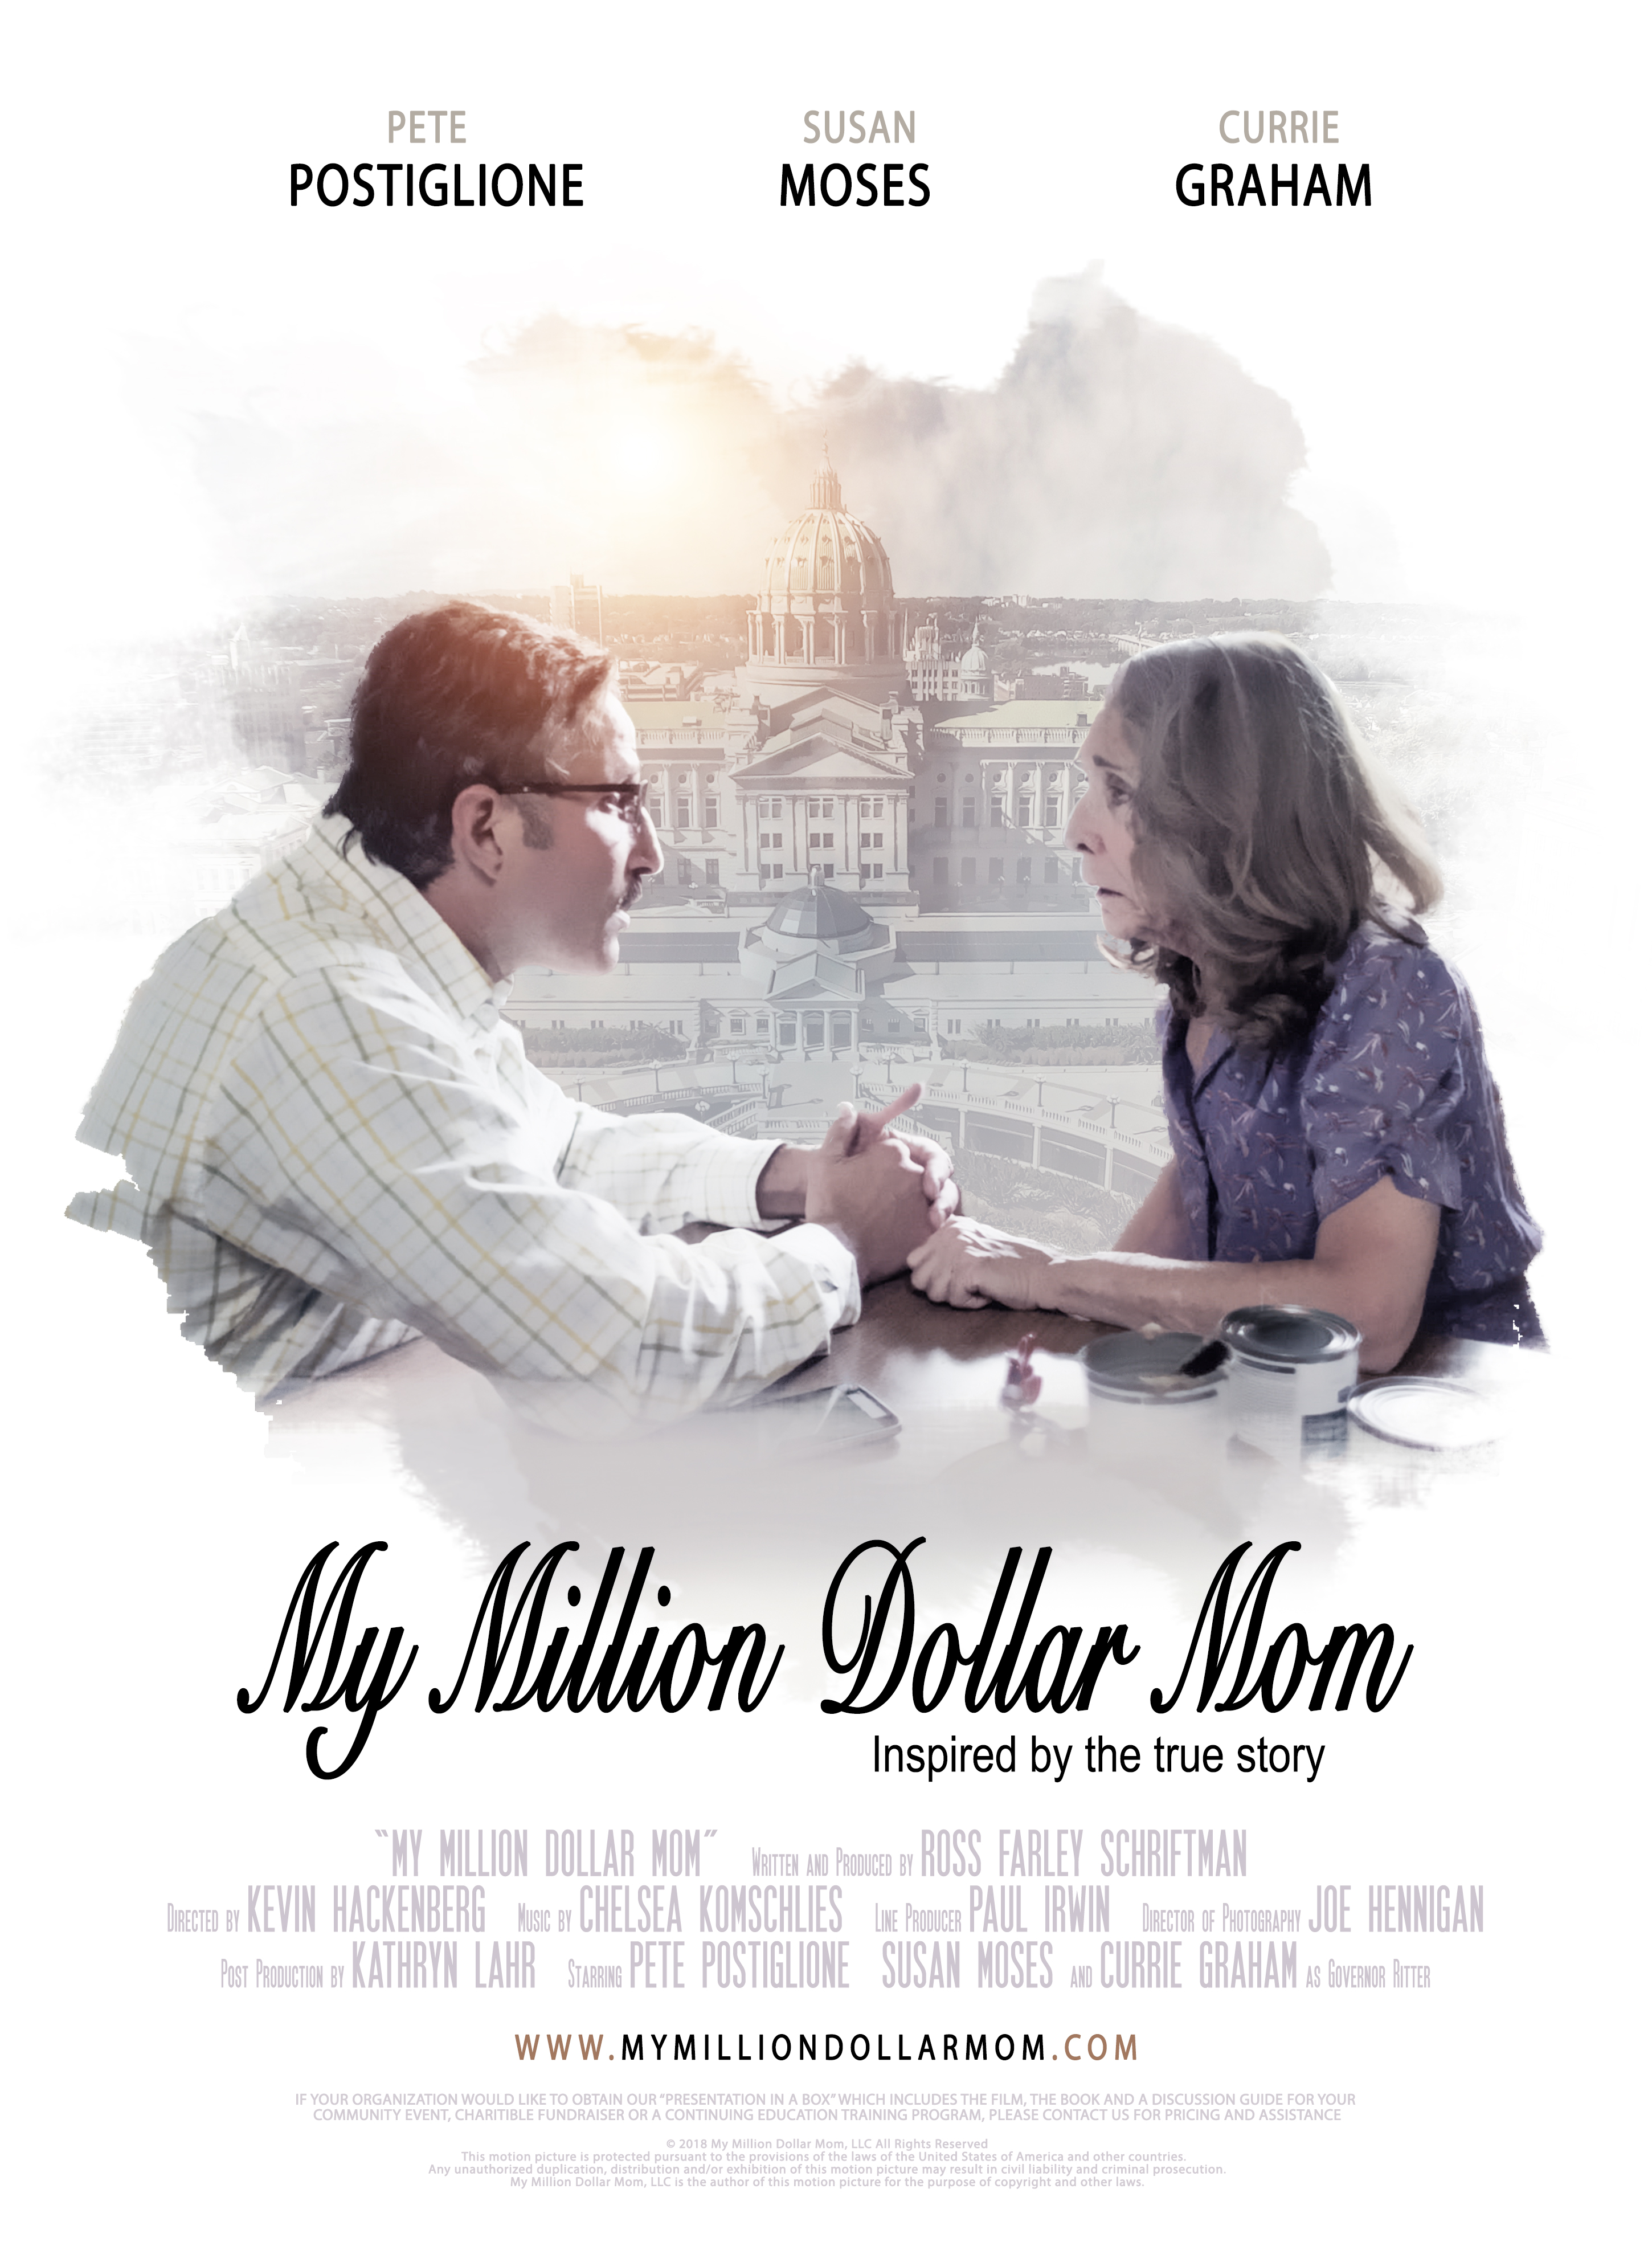 My Million Dollar Mom, a film shot in the Philadelphia area and based on Ross Schriftman’s book by the same name, has been accepted into the New York Shorts International Film Festival.